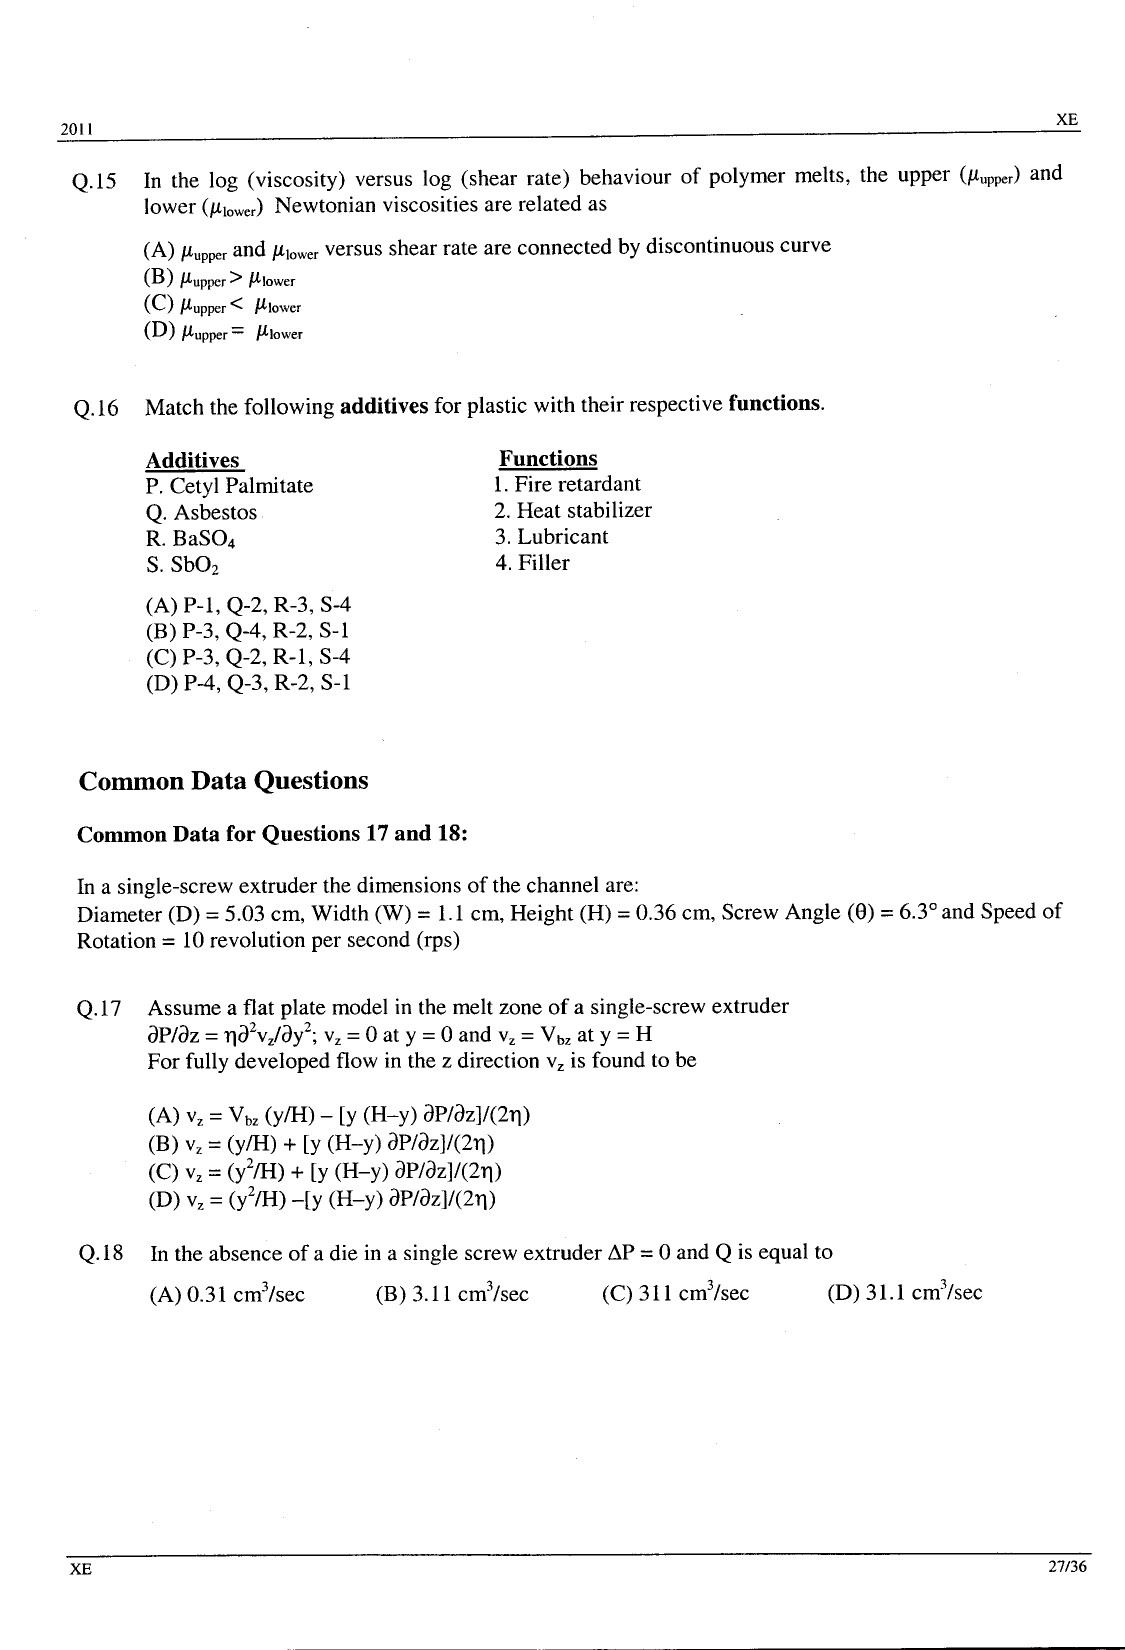 GATE Exam Question Paper 2011 Engineering Sciences 27